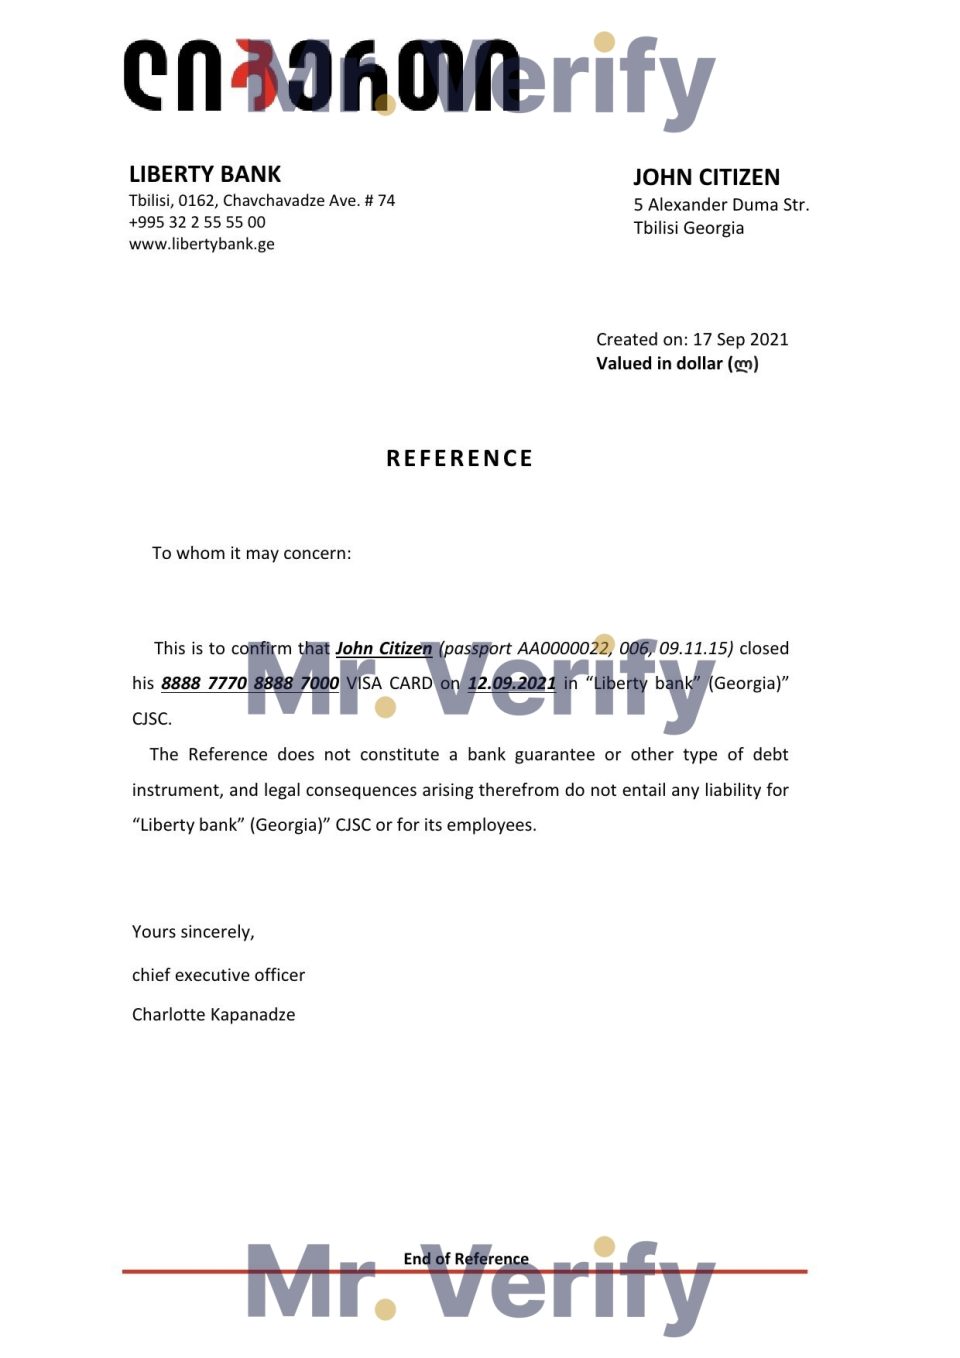 Download Georgia Liberty Bank Reference Letter Templates | Editable Word